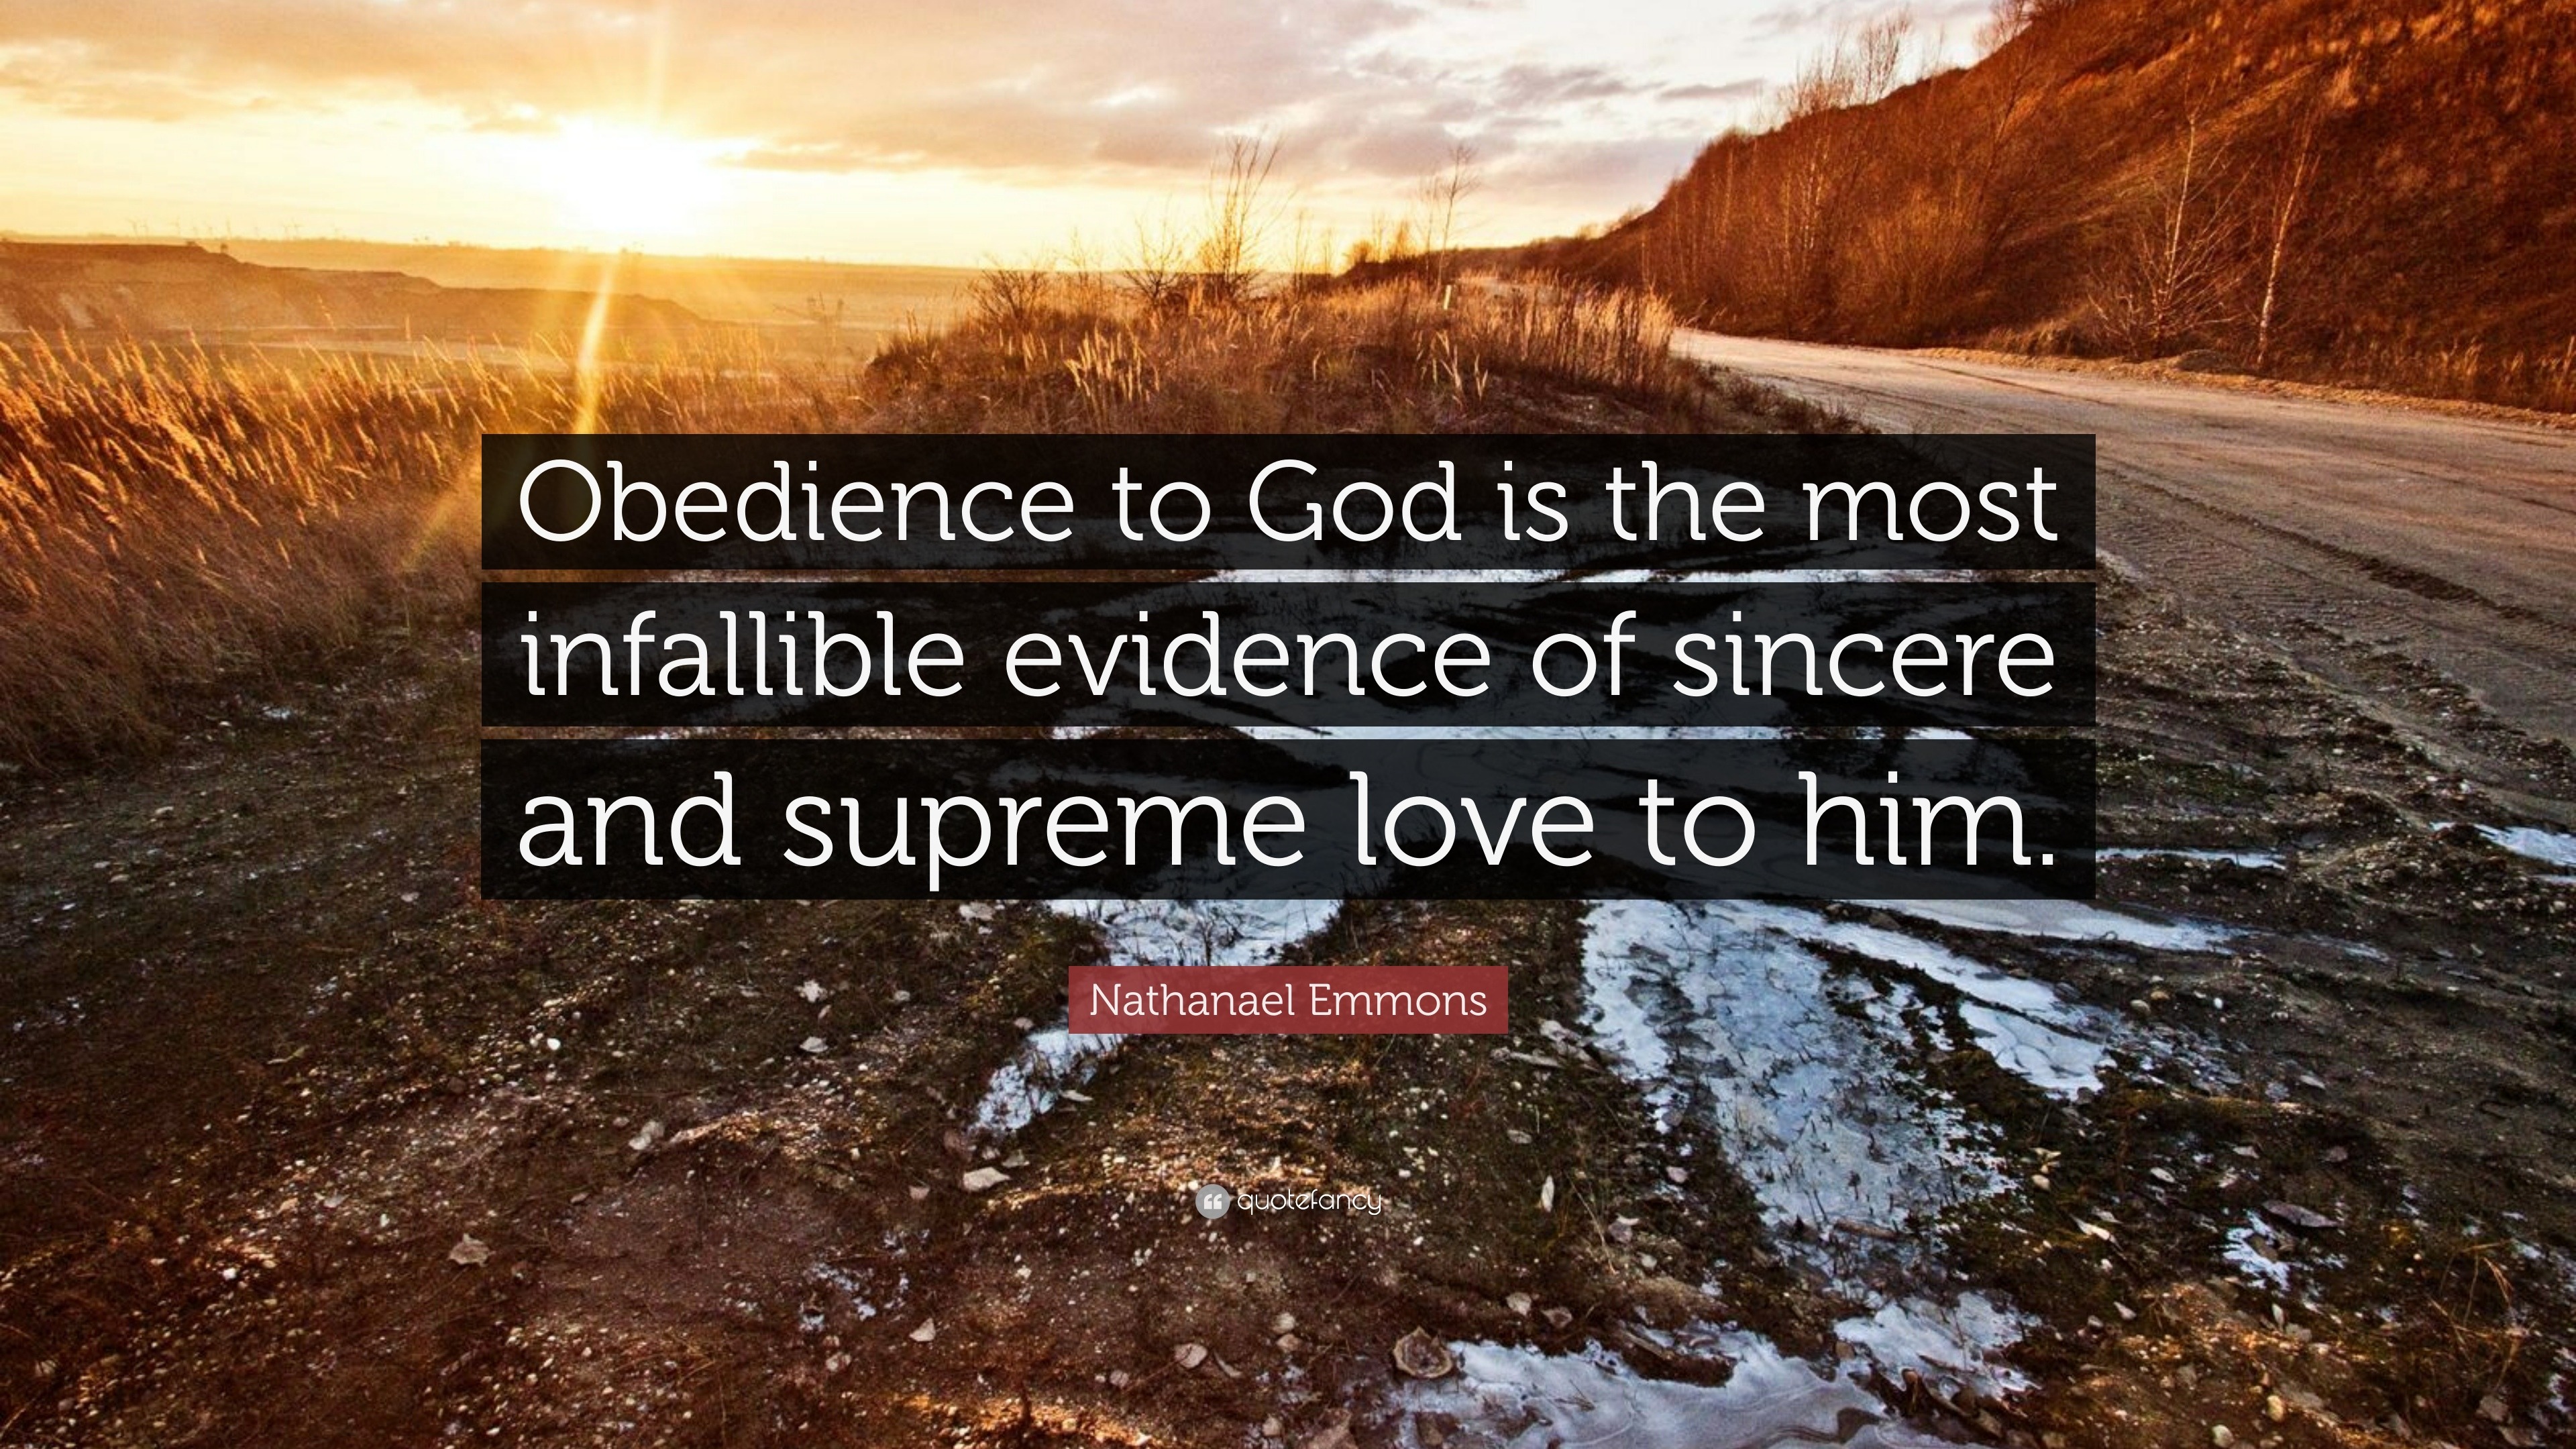 Nathanael Emmons Quote “obedience To God Is The Most Infallible Evidence Of Sincere And Supreme